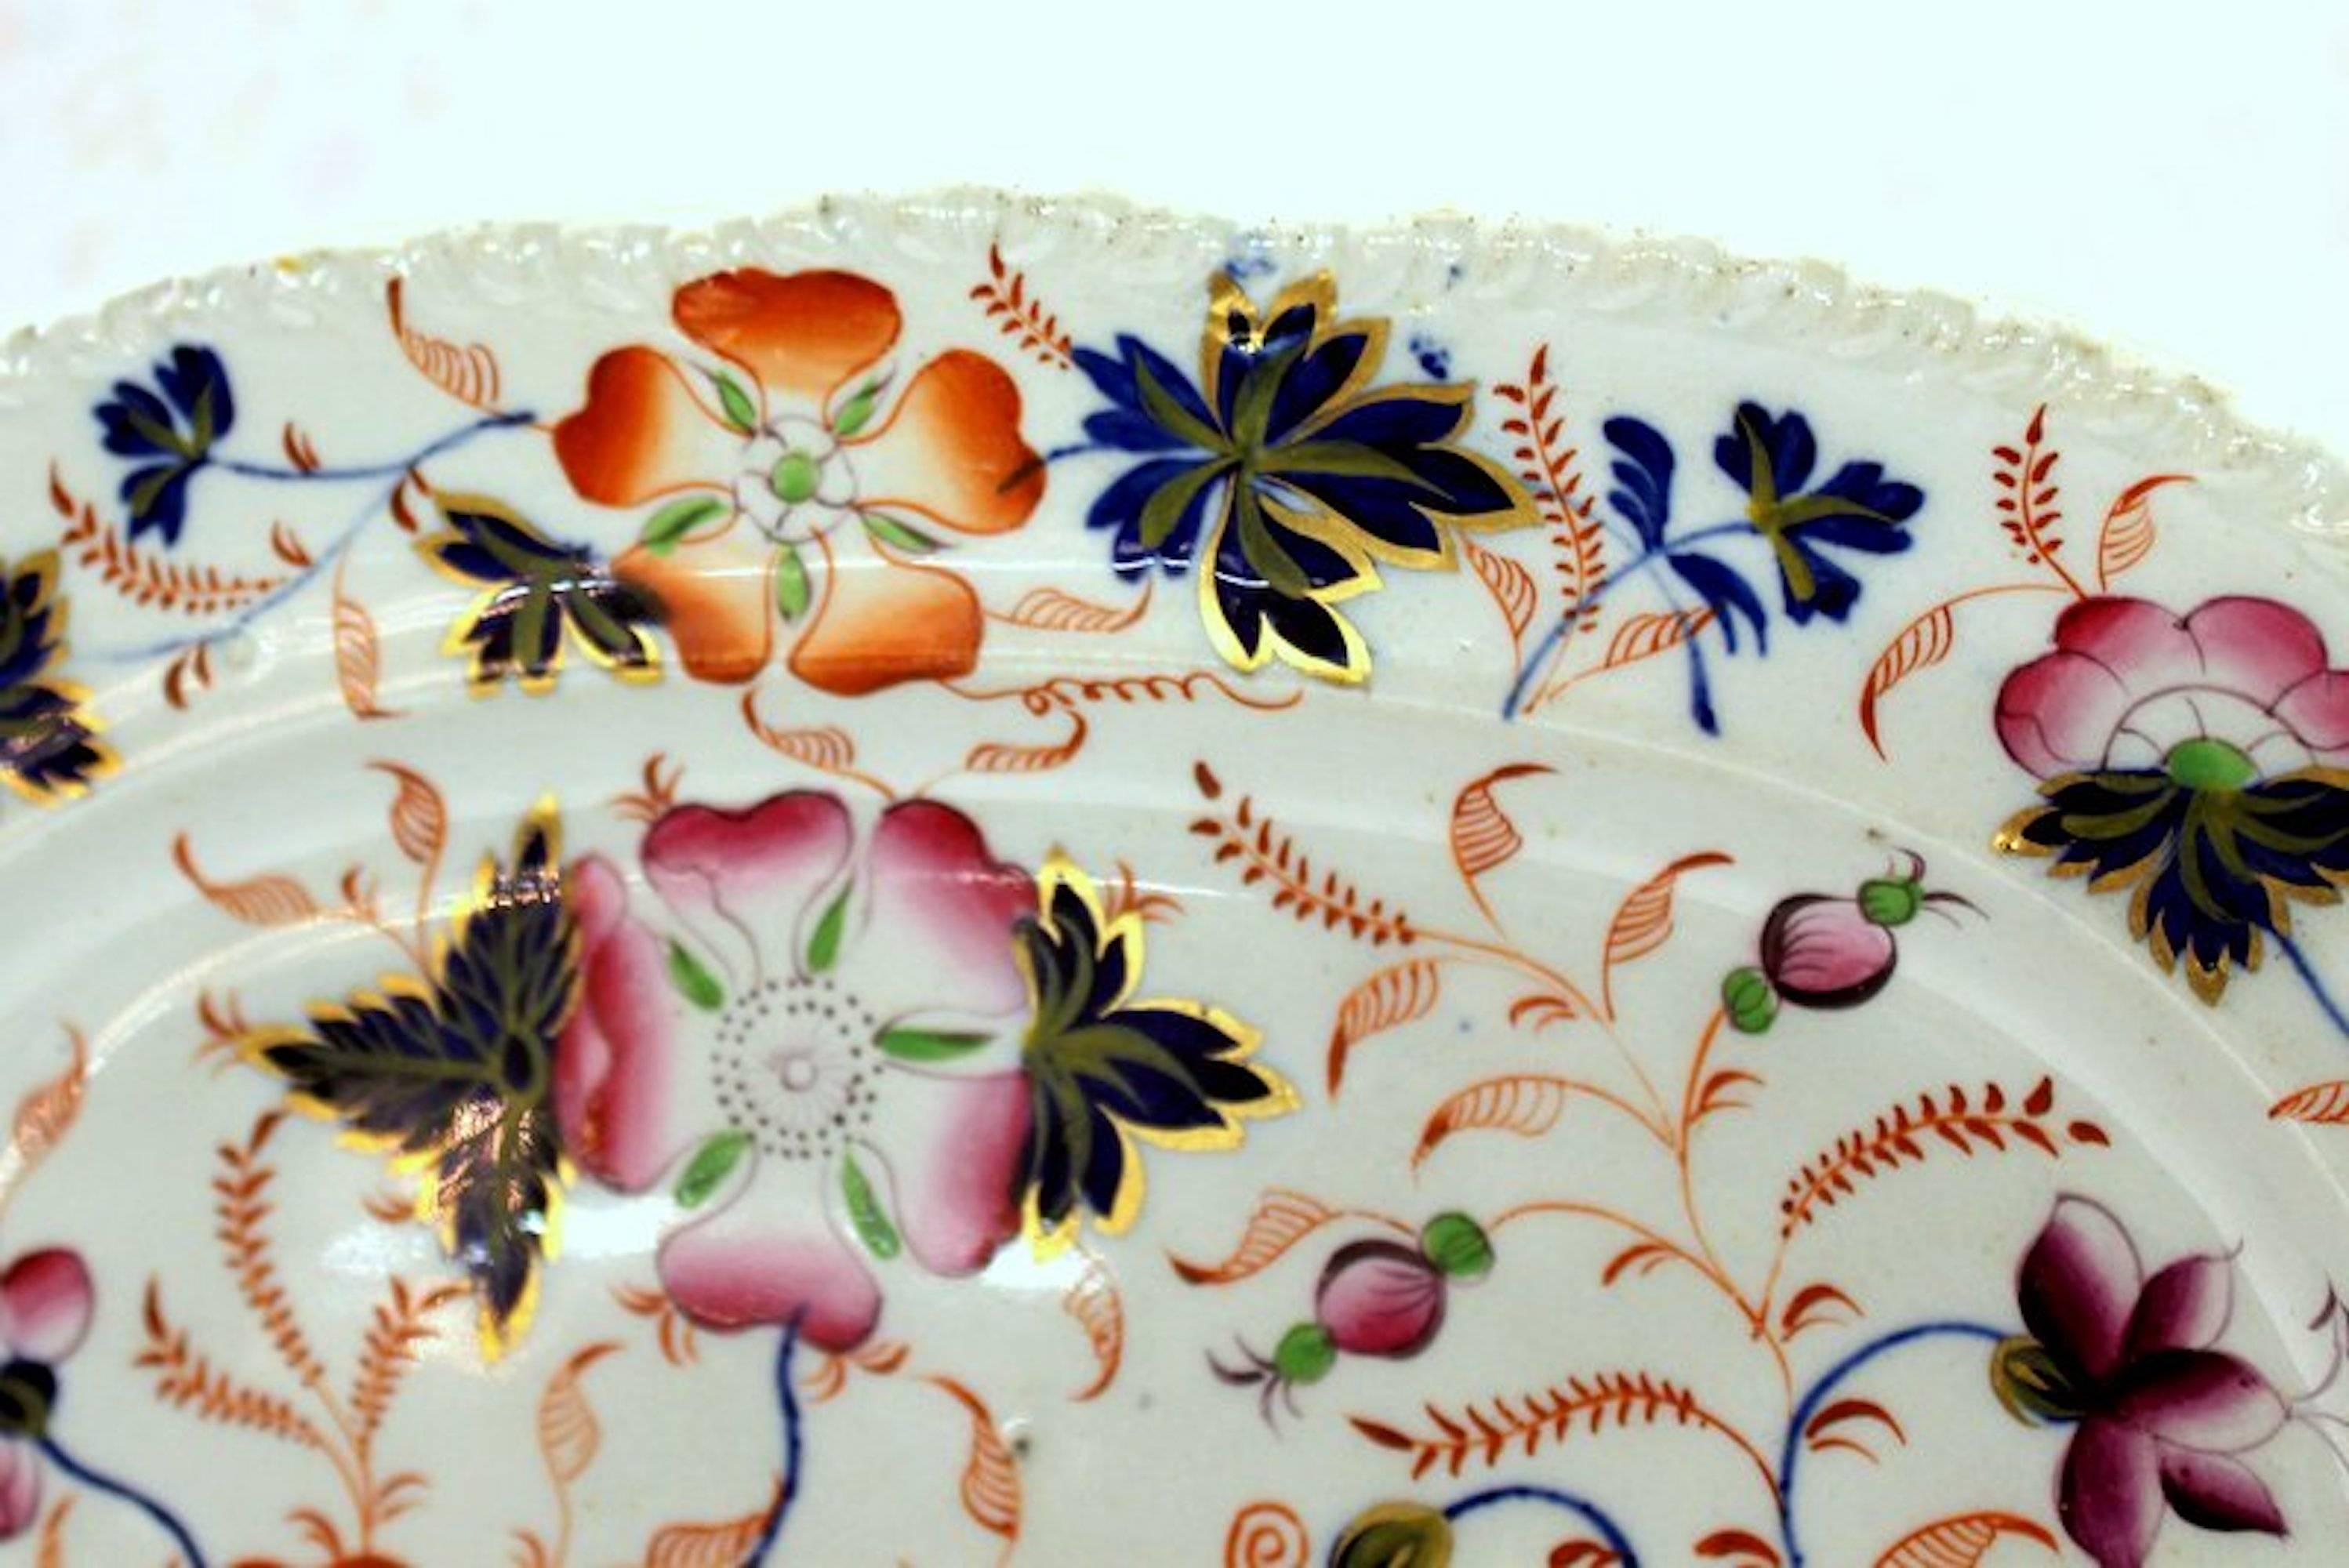 Fine antique English hand-painted ironstone Imari decor platter with extraordinarily colorful 